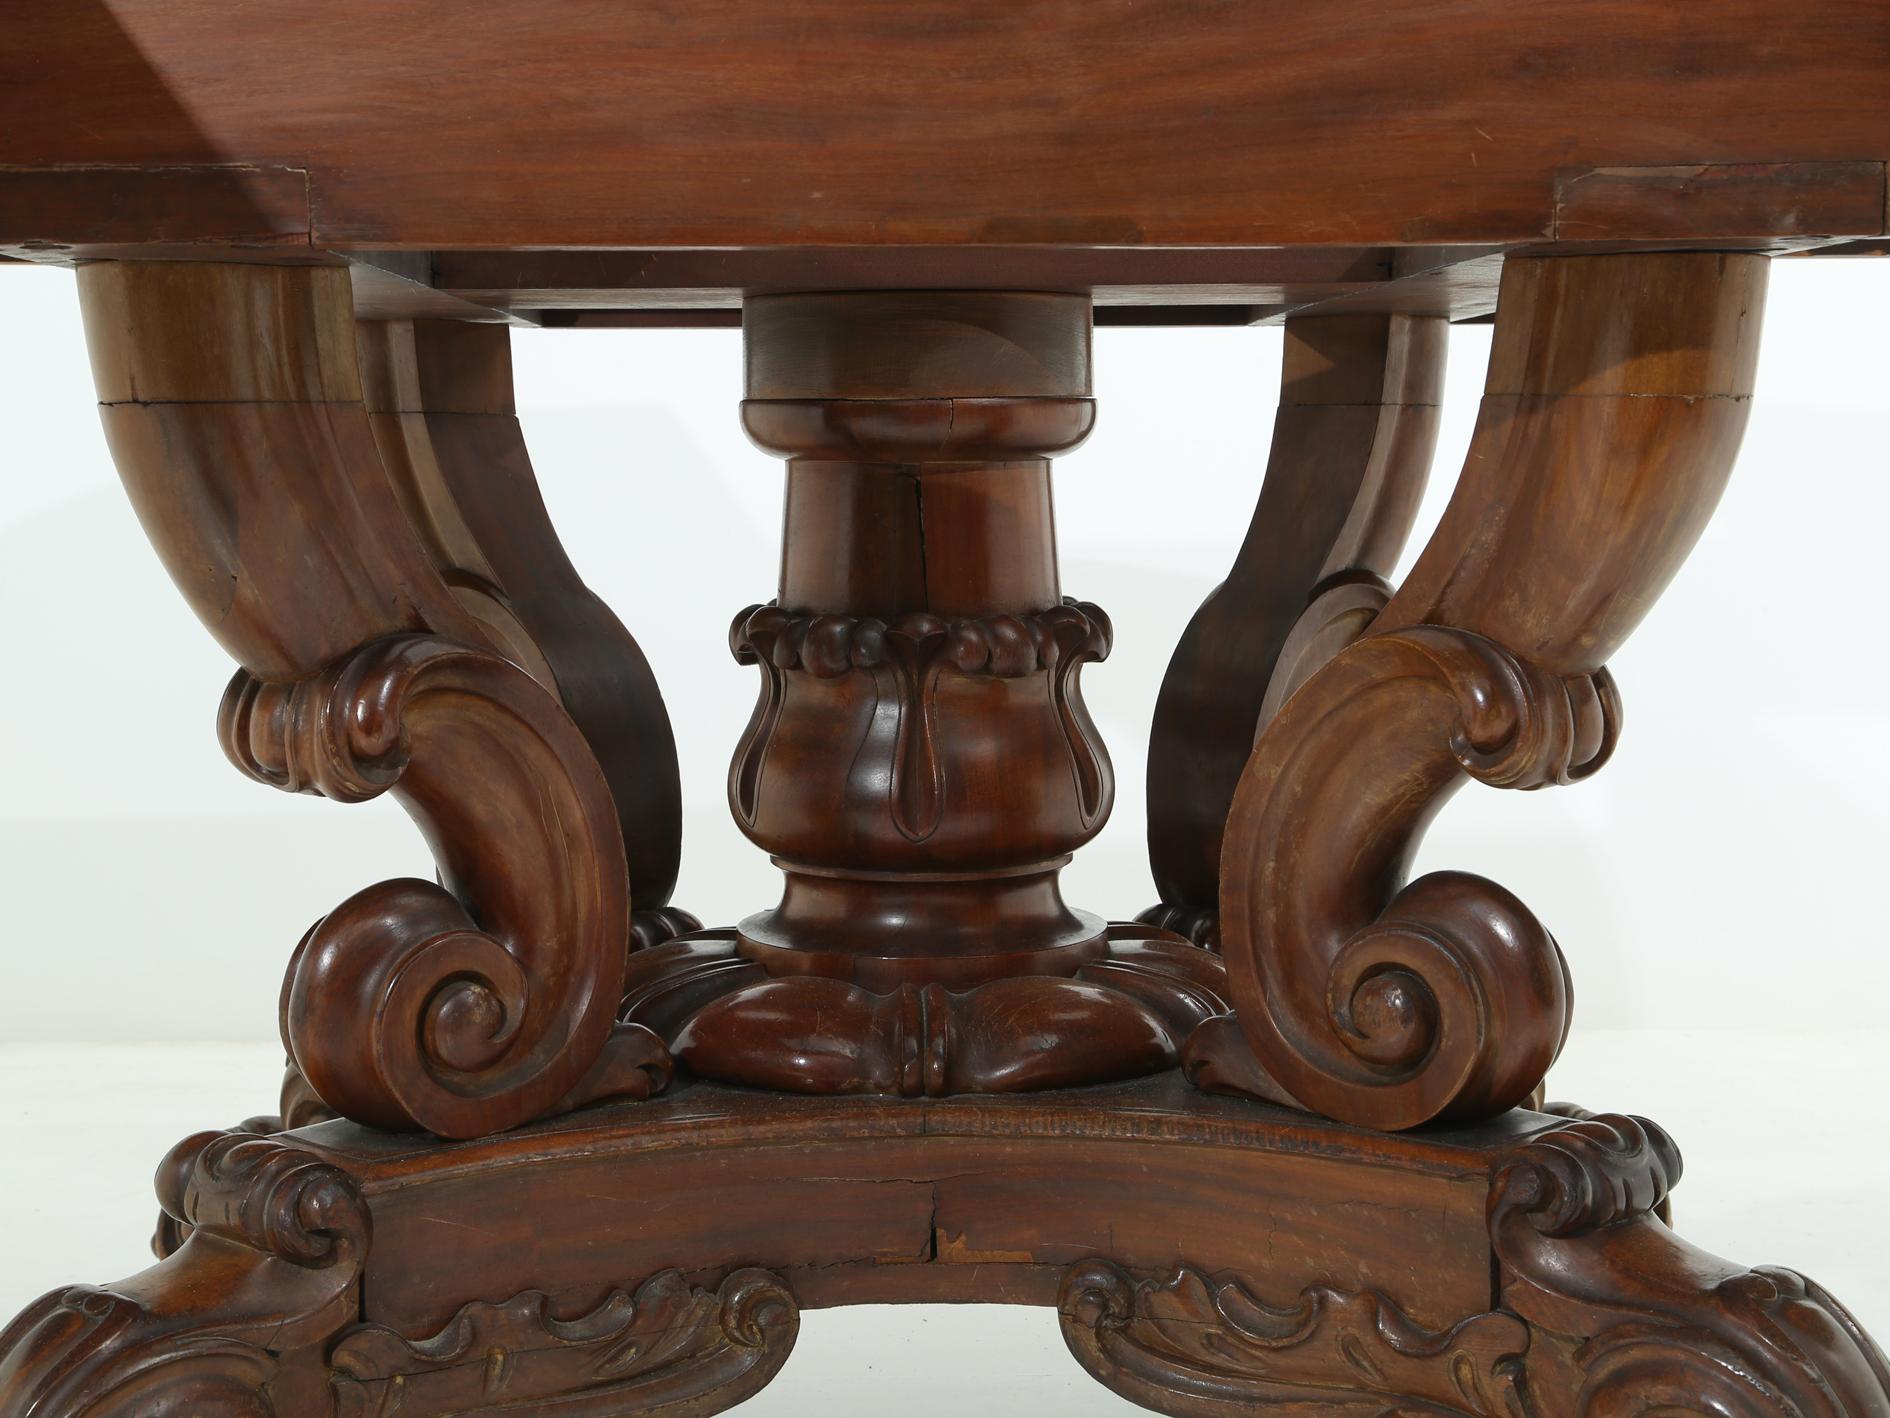 Other Elegant Round Table in Wood from 19th Century